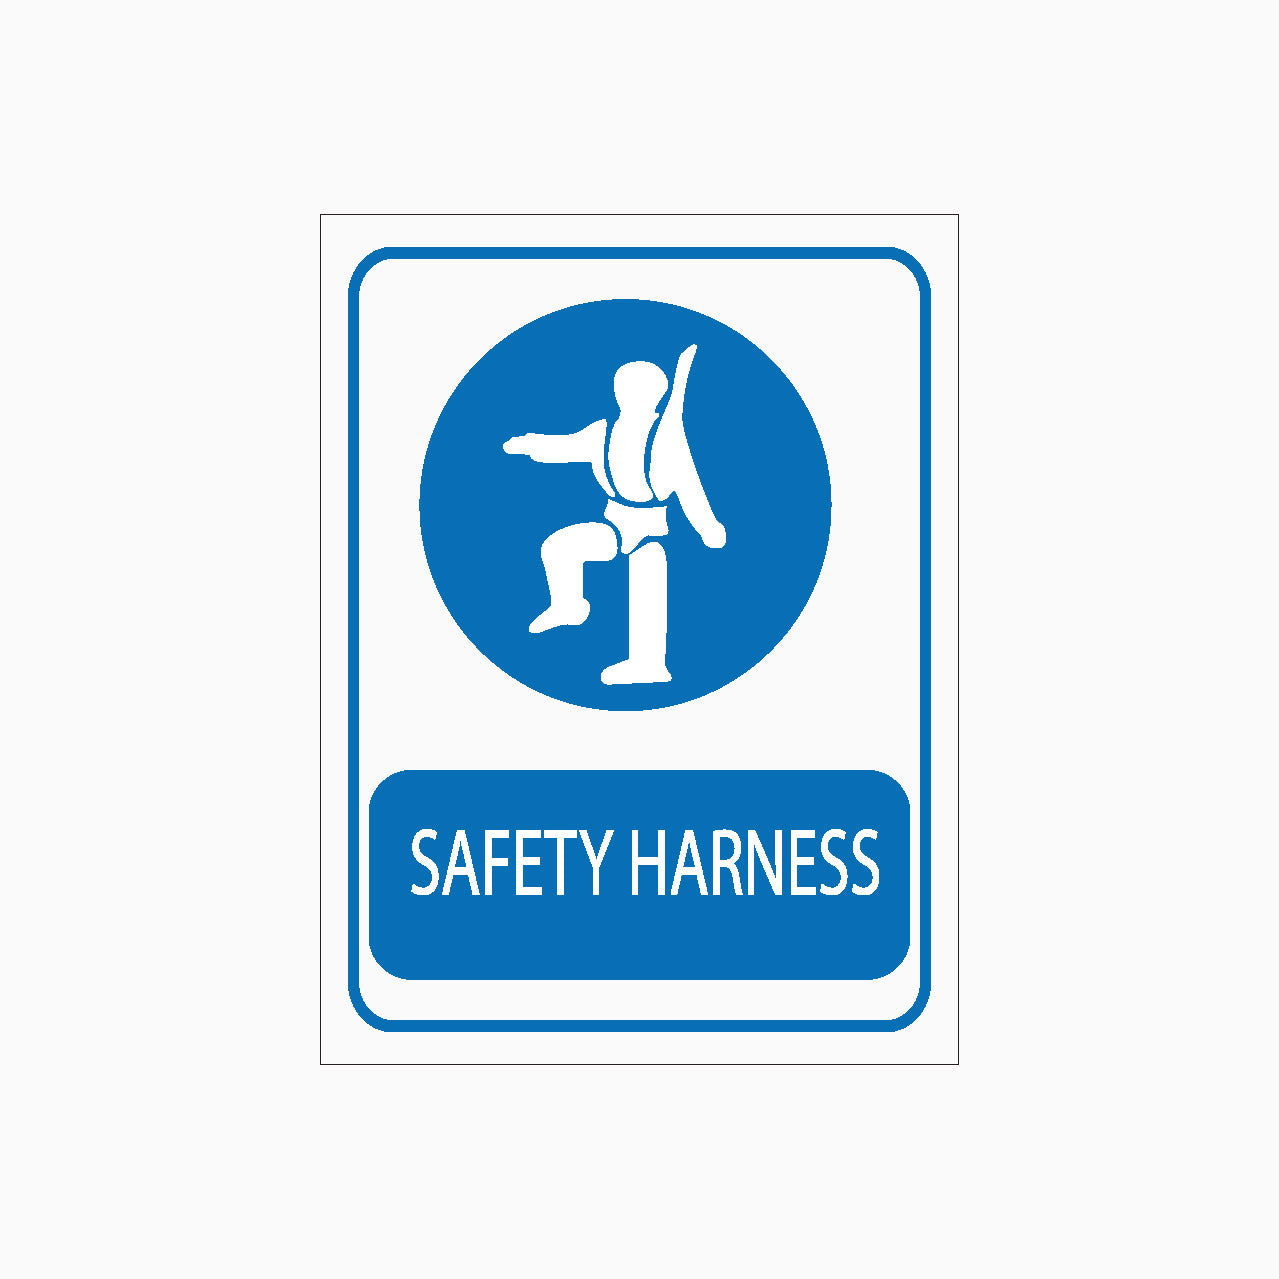 SAFETY HARNESS SIGN - PPE SIGN